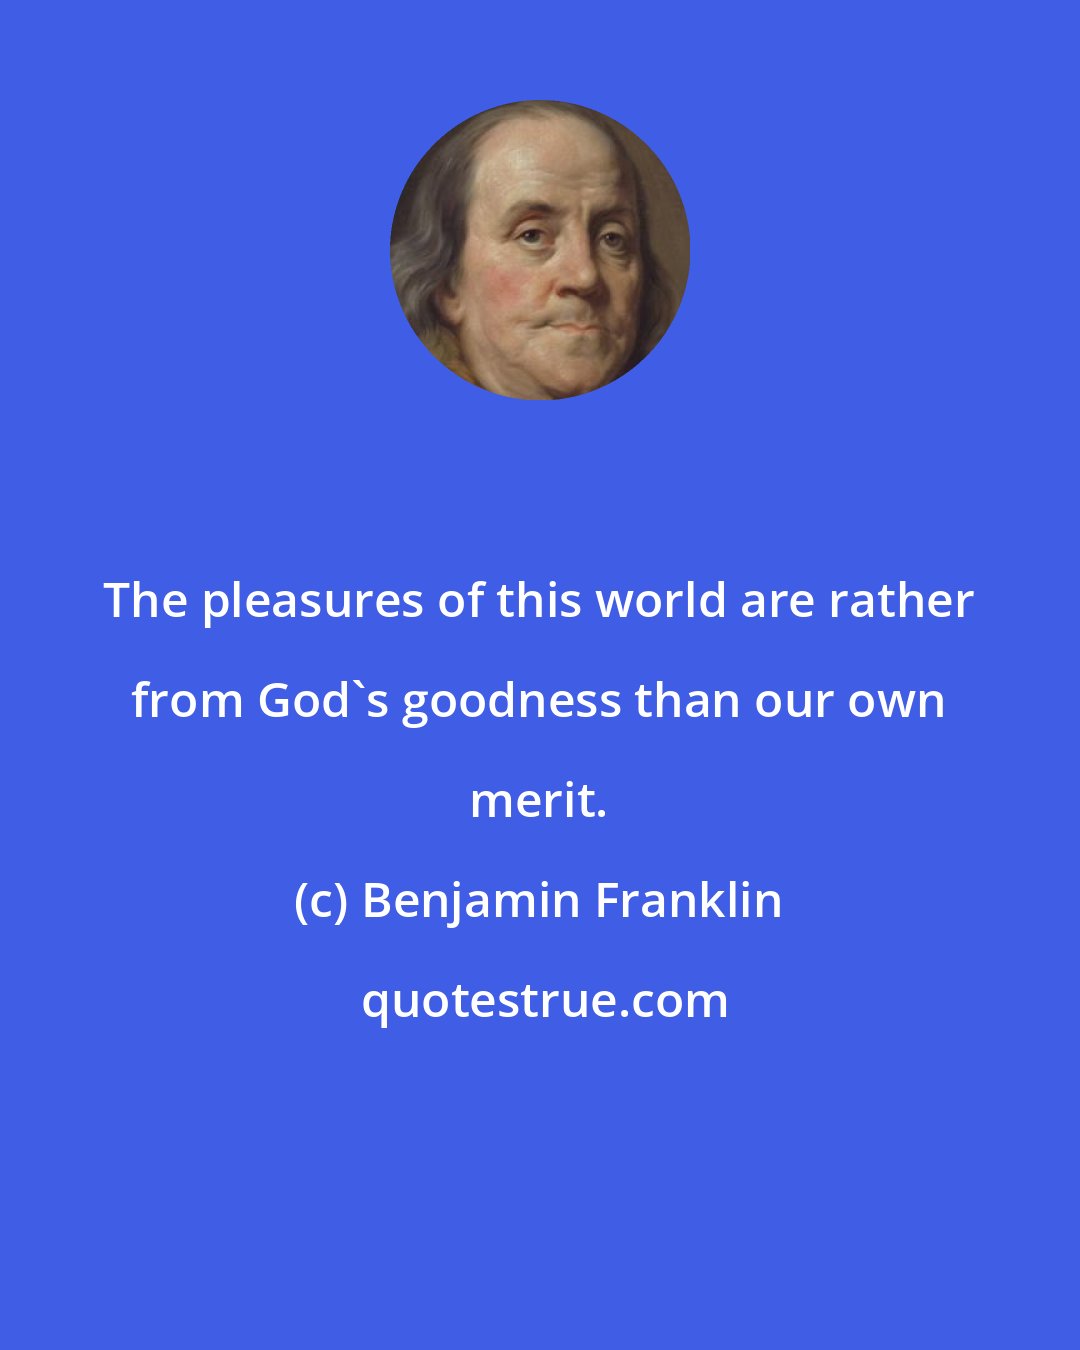 Benjamin Franklin: The pleasures of this world are rather from God's goodness than our own merit.